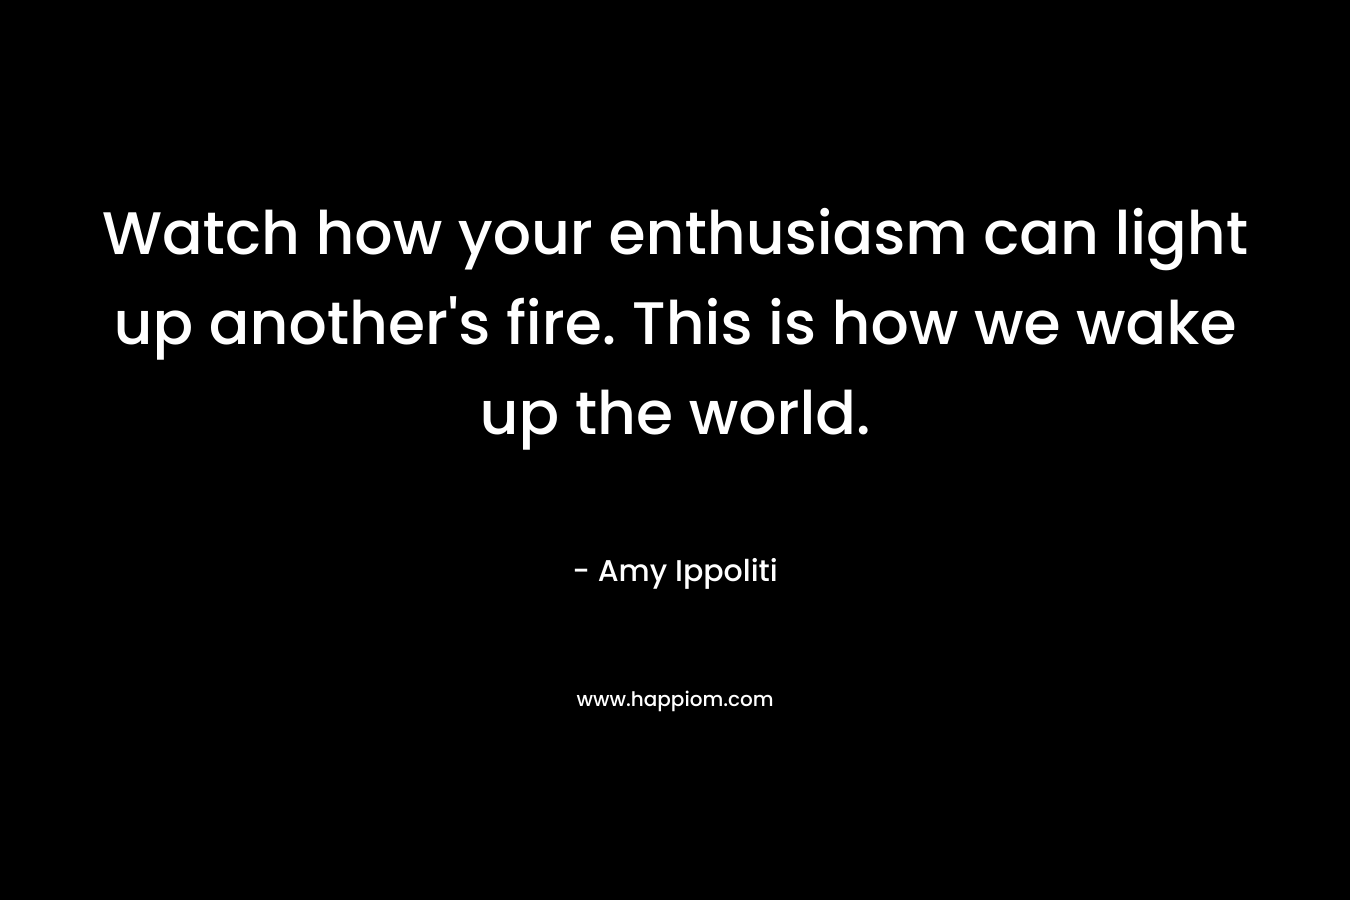 Watch how your enthusiasm can light up another’s fire. This is how we wake up the world. – Amy Ippoliti